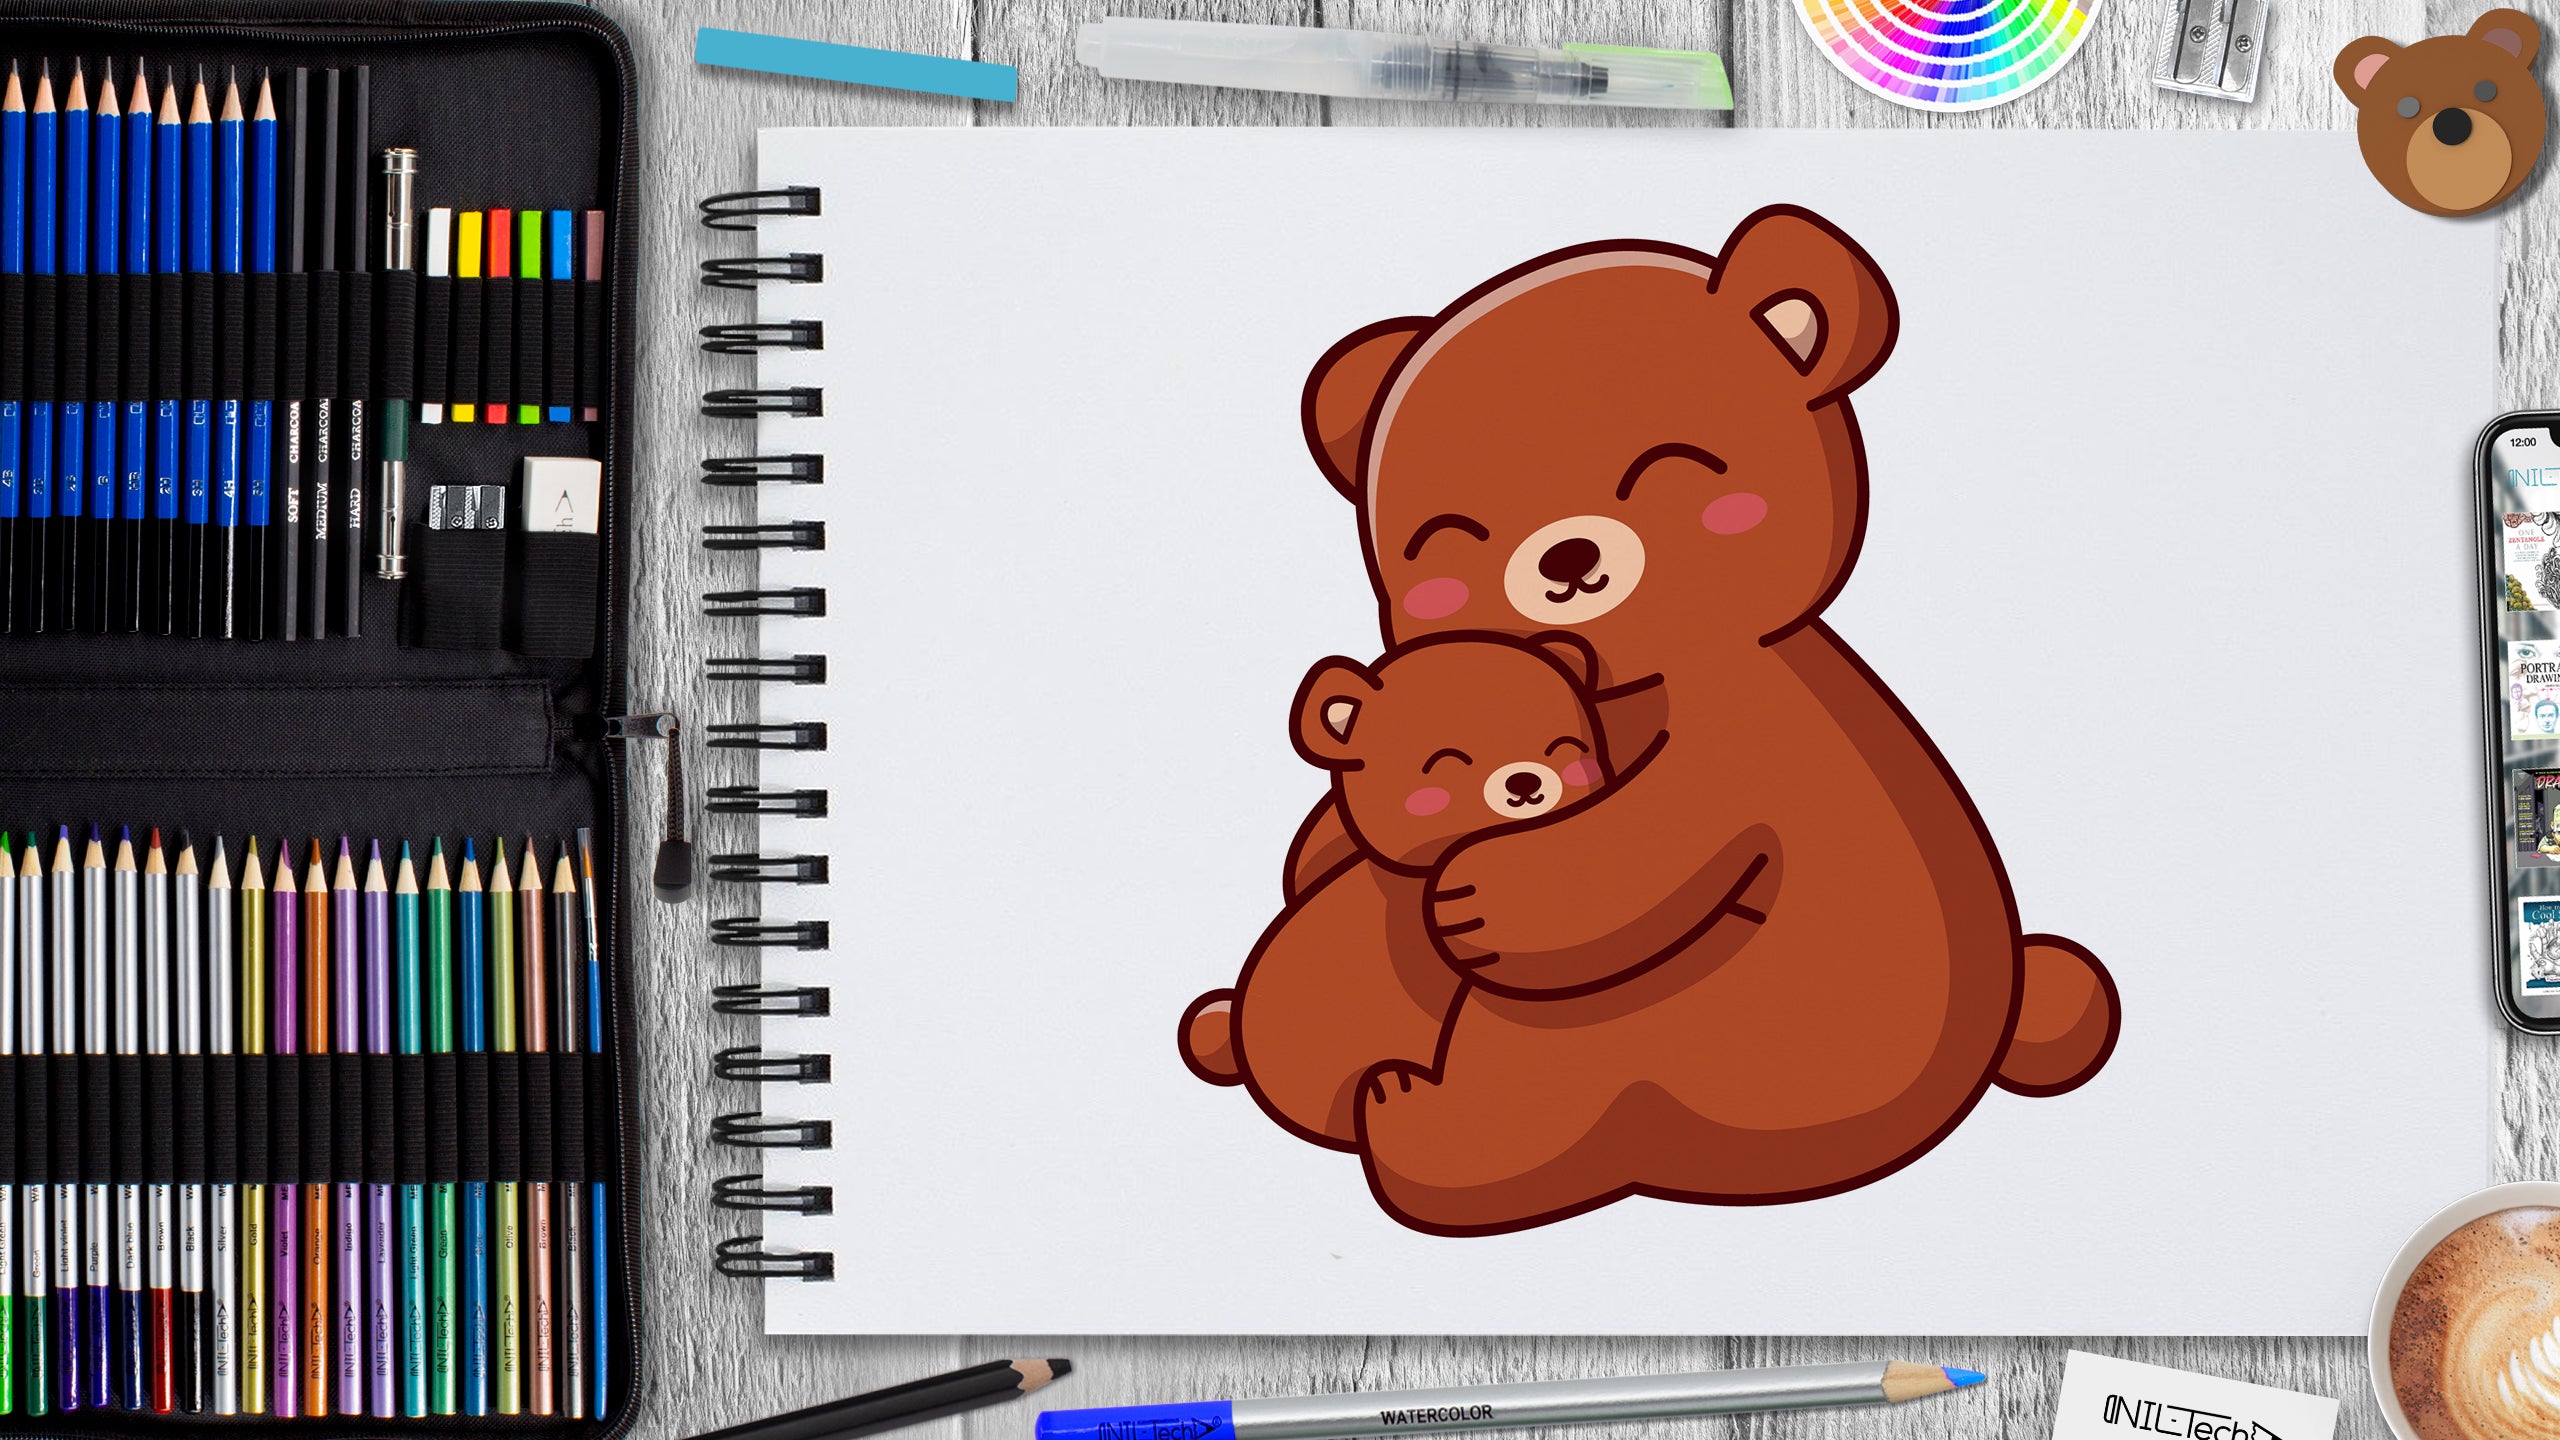 How to Draw a Bear? - Step by Step Drawing Guide for Kids